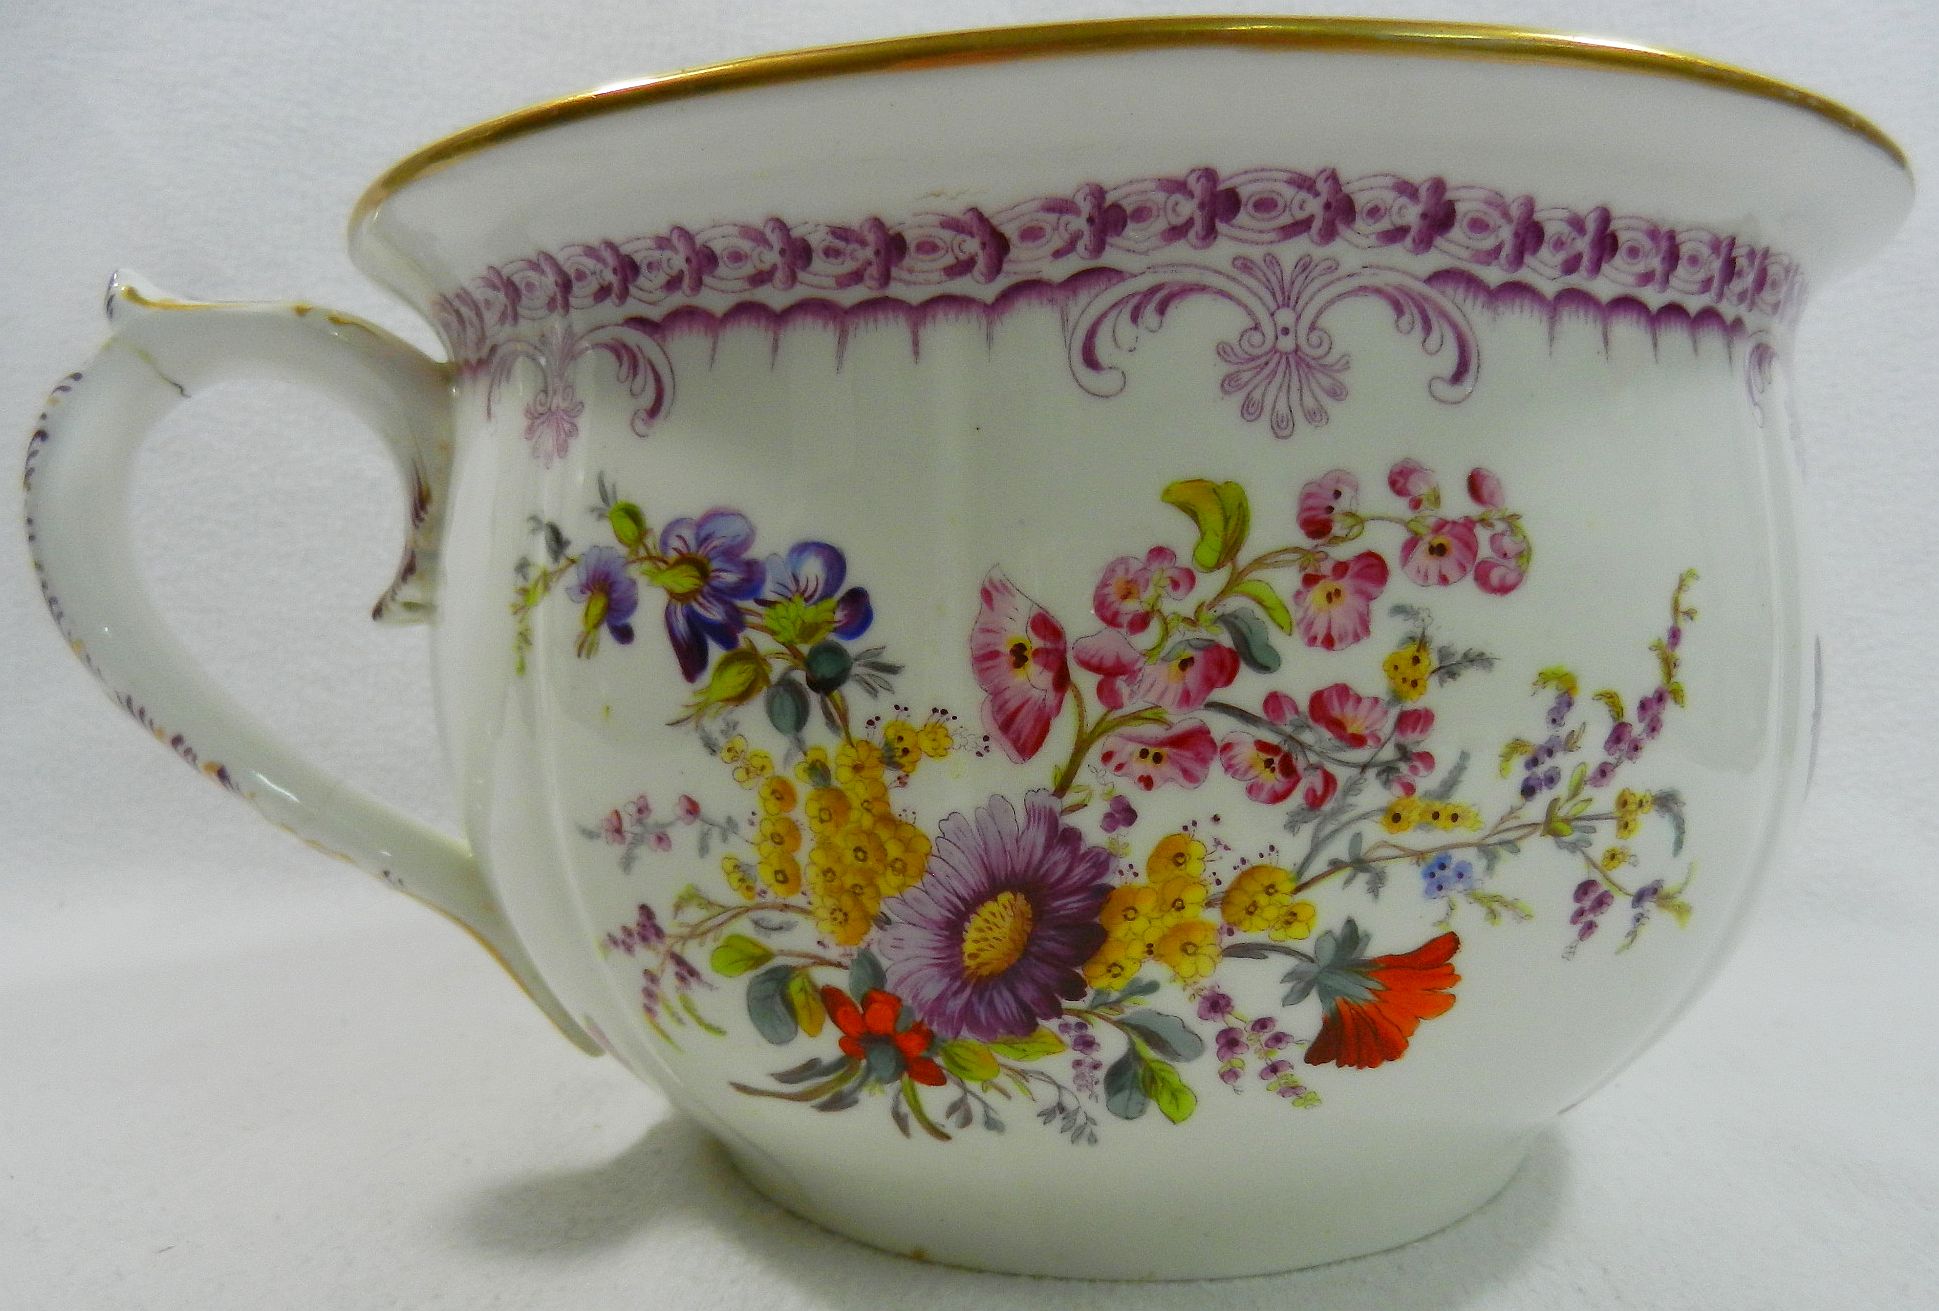 A 19th century porcelain chamber pot with printed and painted decoration of floral sprays and - Image 8 of 9